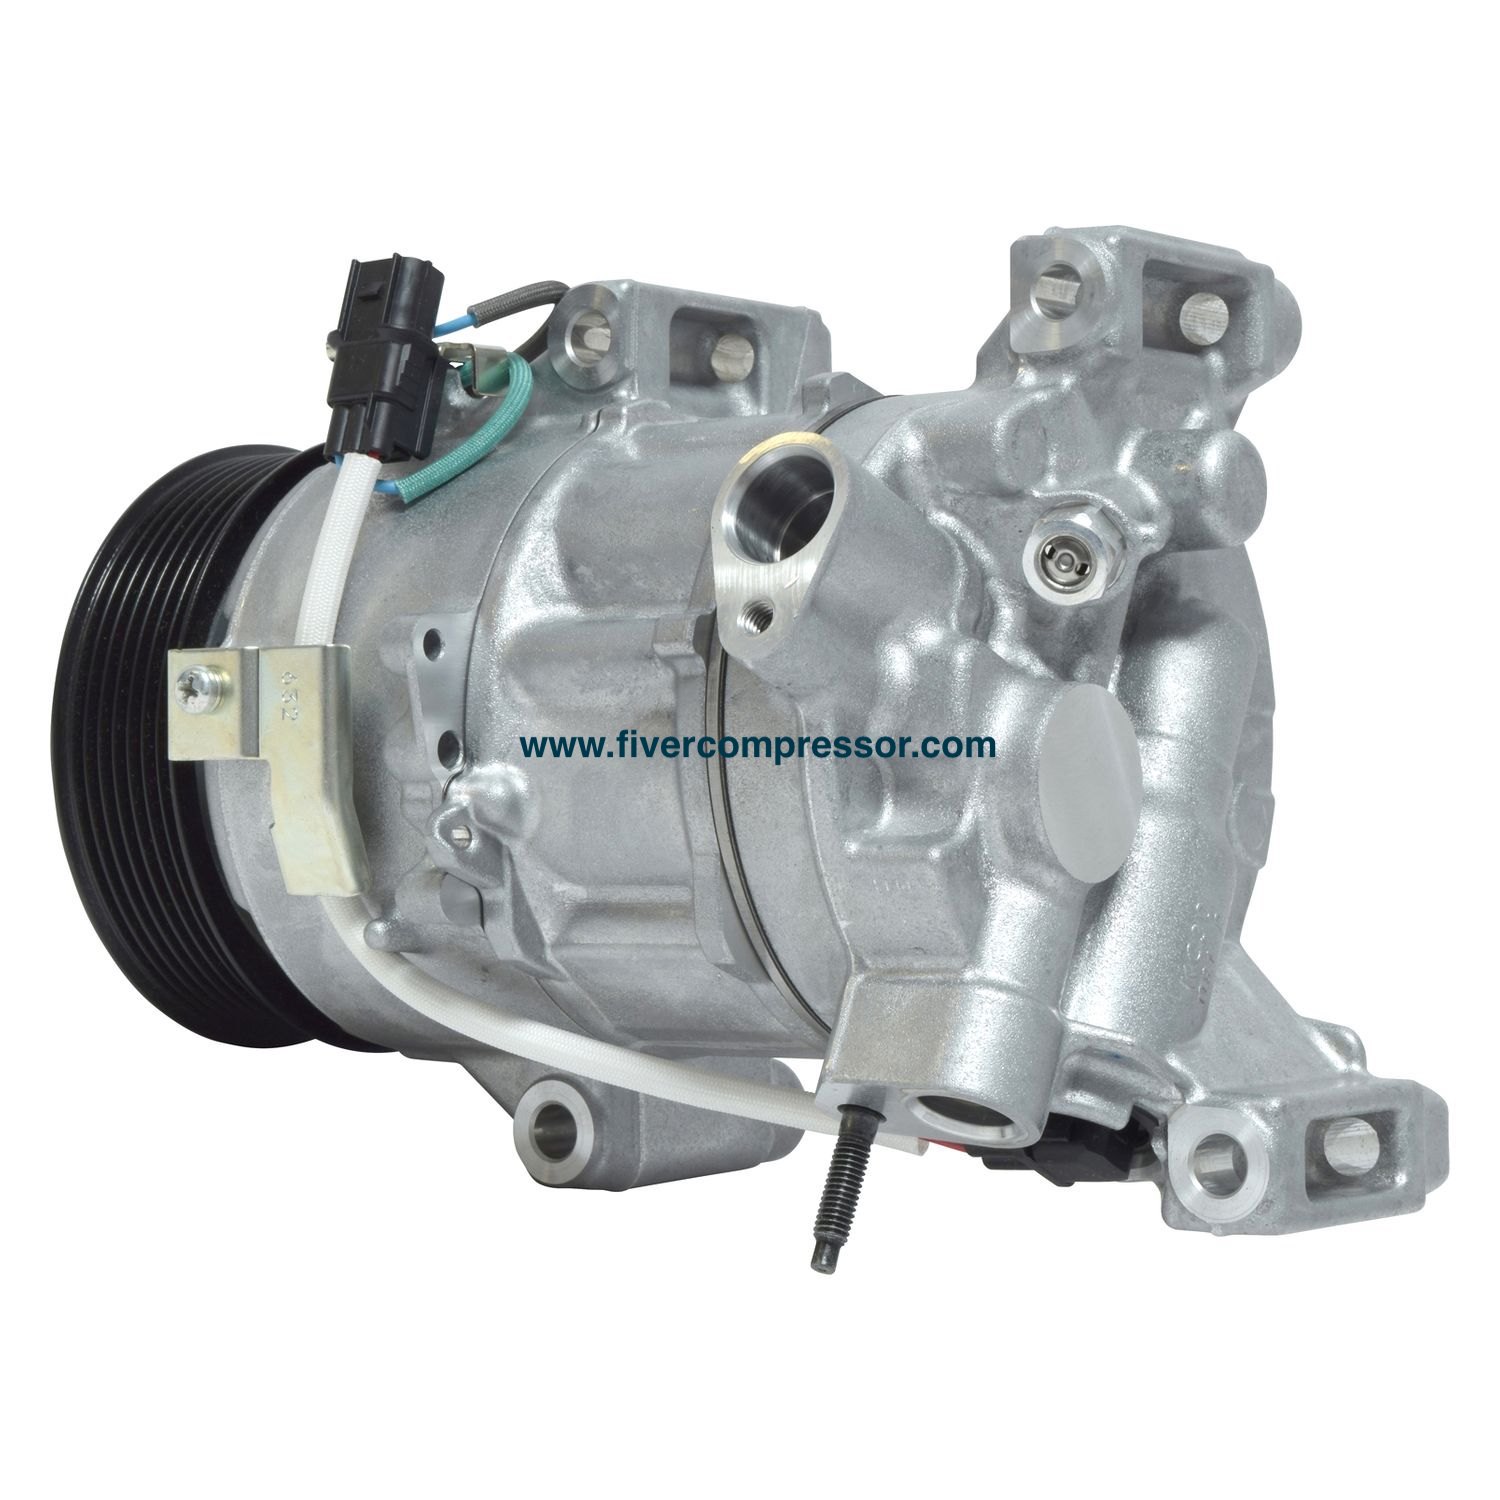 6SBU14C 7PK 12V A/C Compressor Assy 388106A0A01,CO11552C for Honda Accord L4 1.5L Supercharged 2018-2020